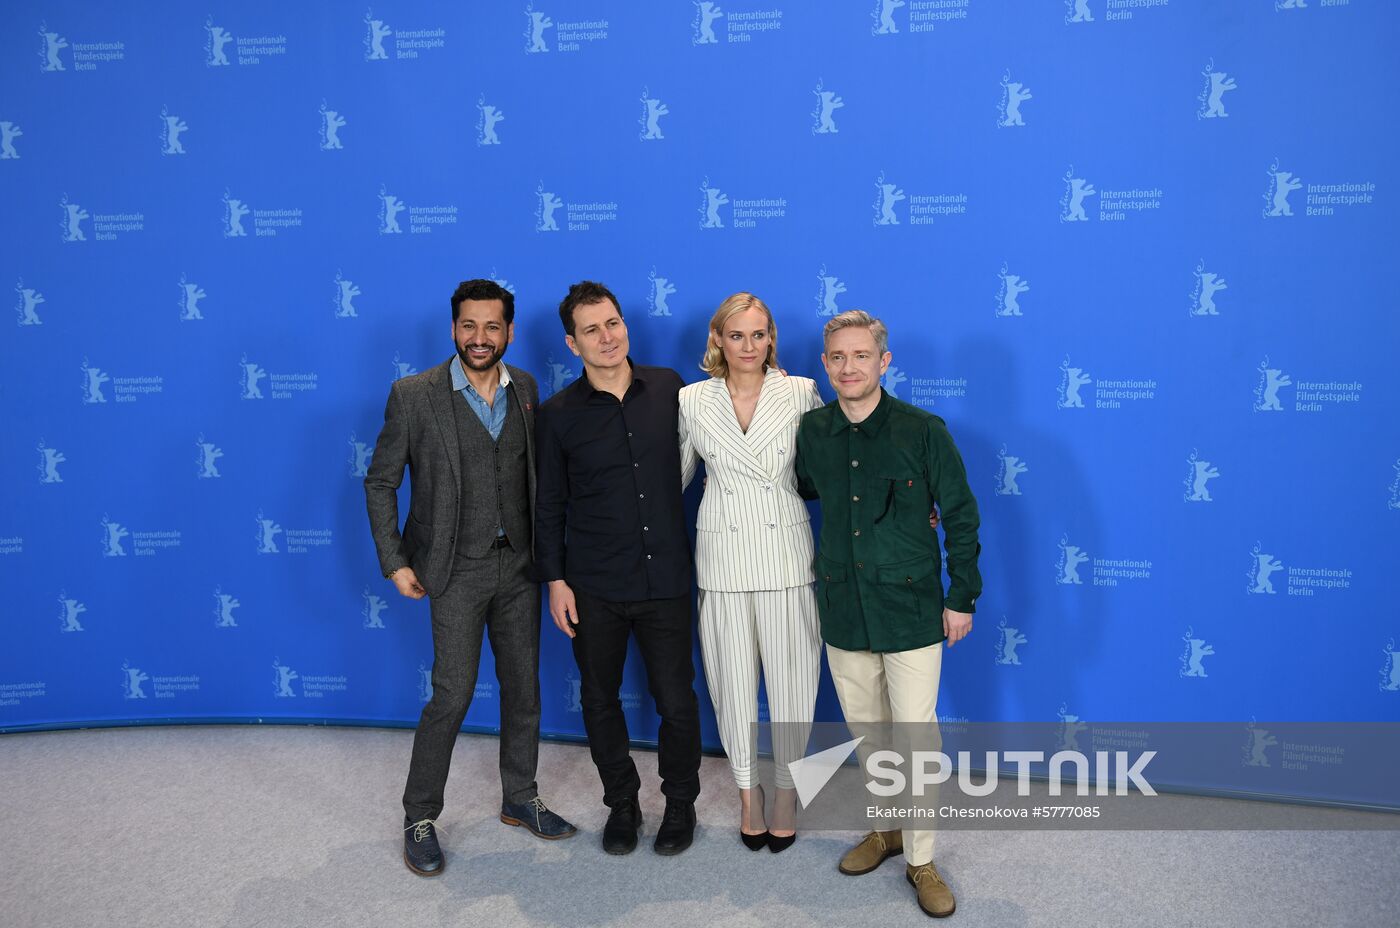 Germany Berlinale The Operative Movie